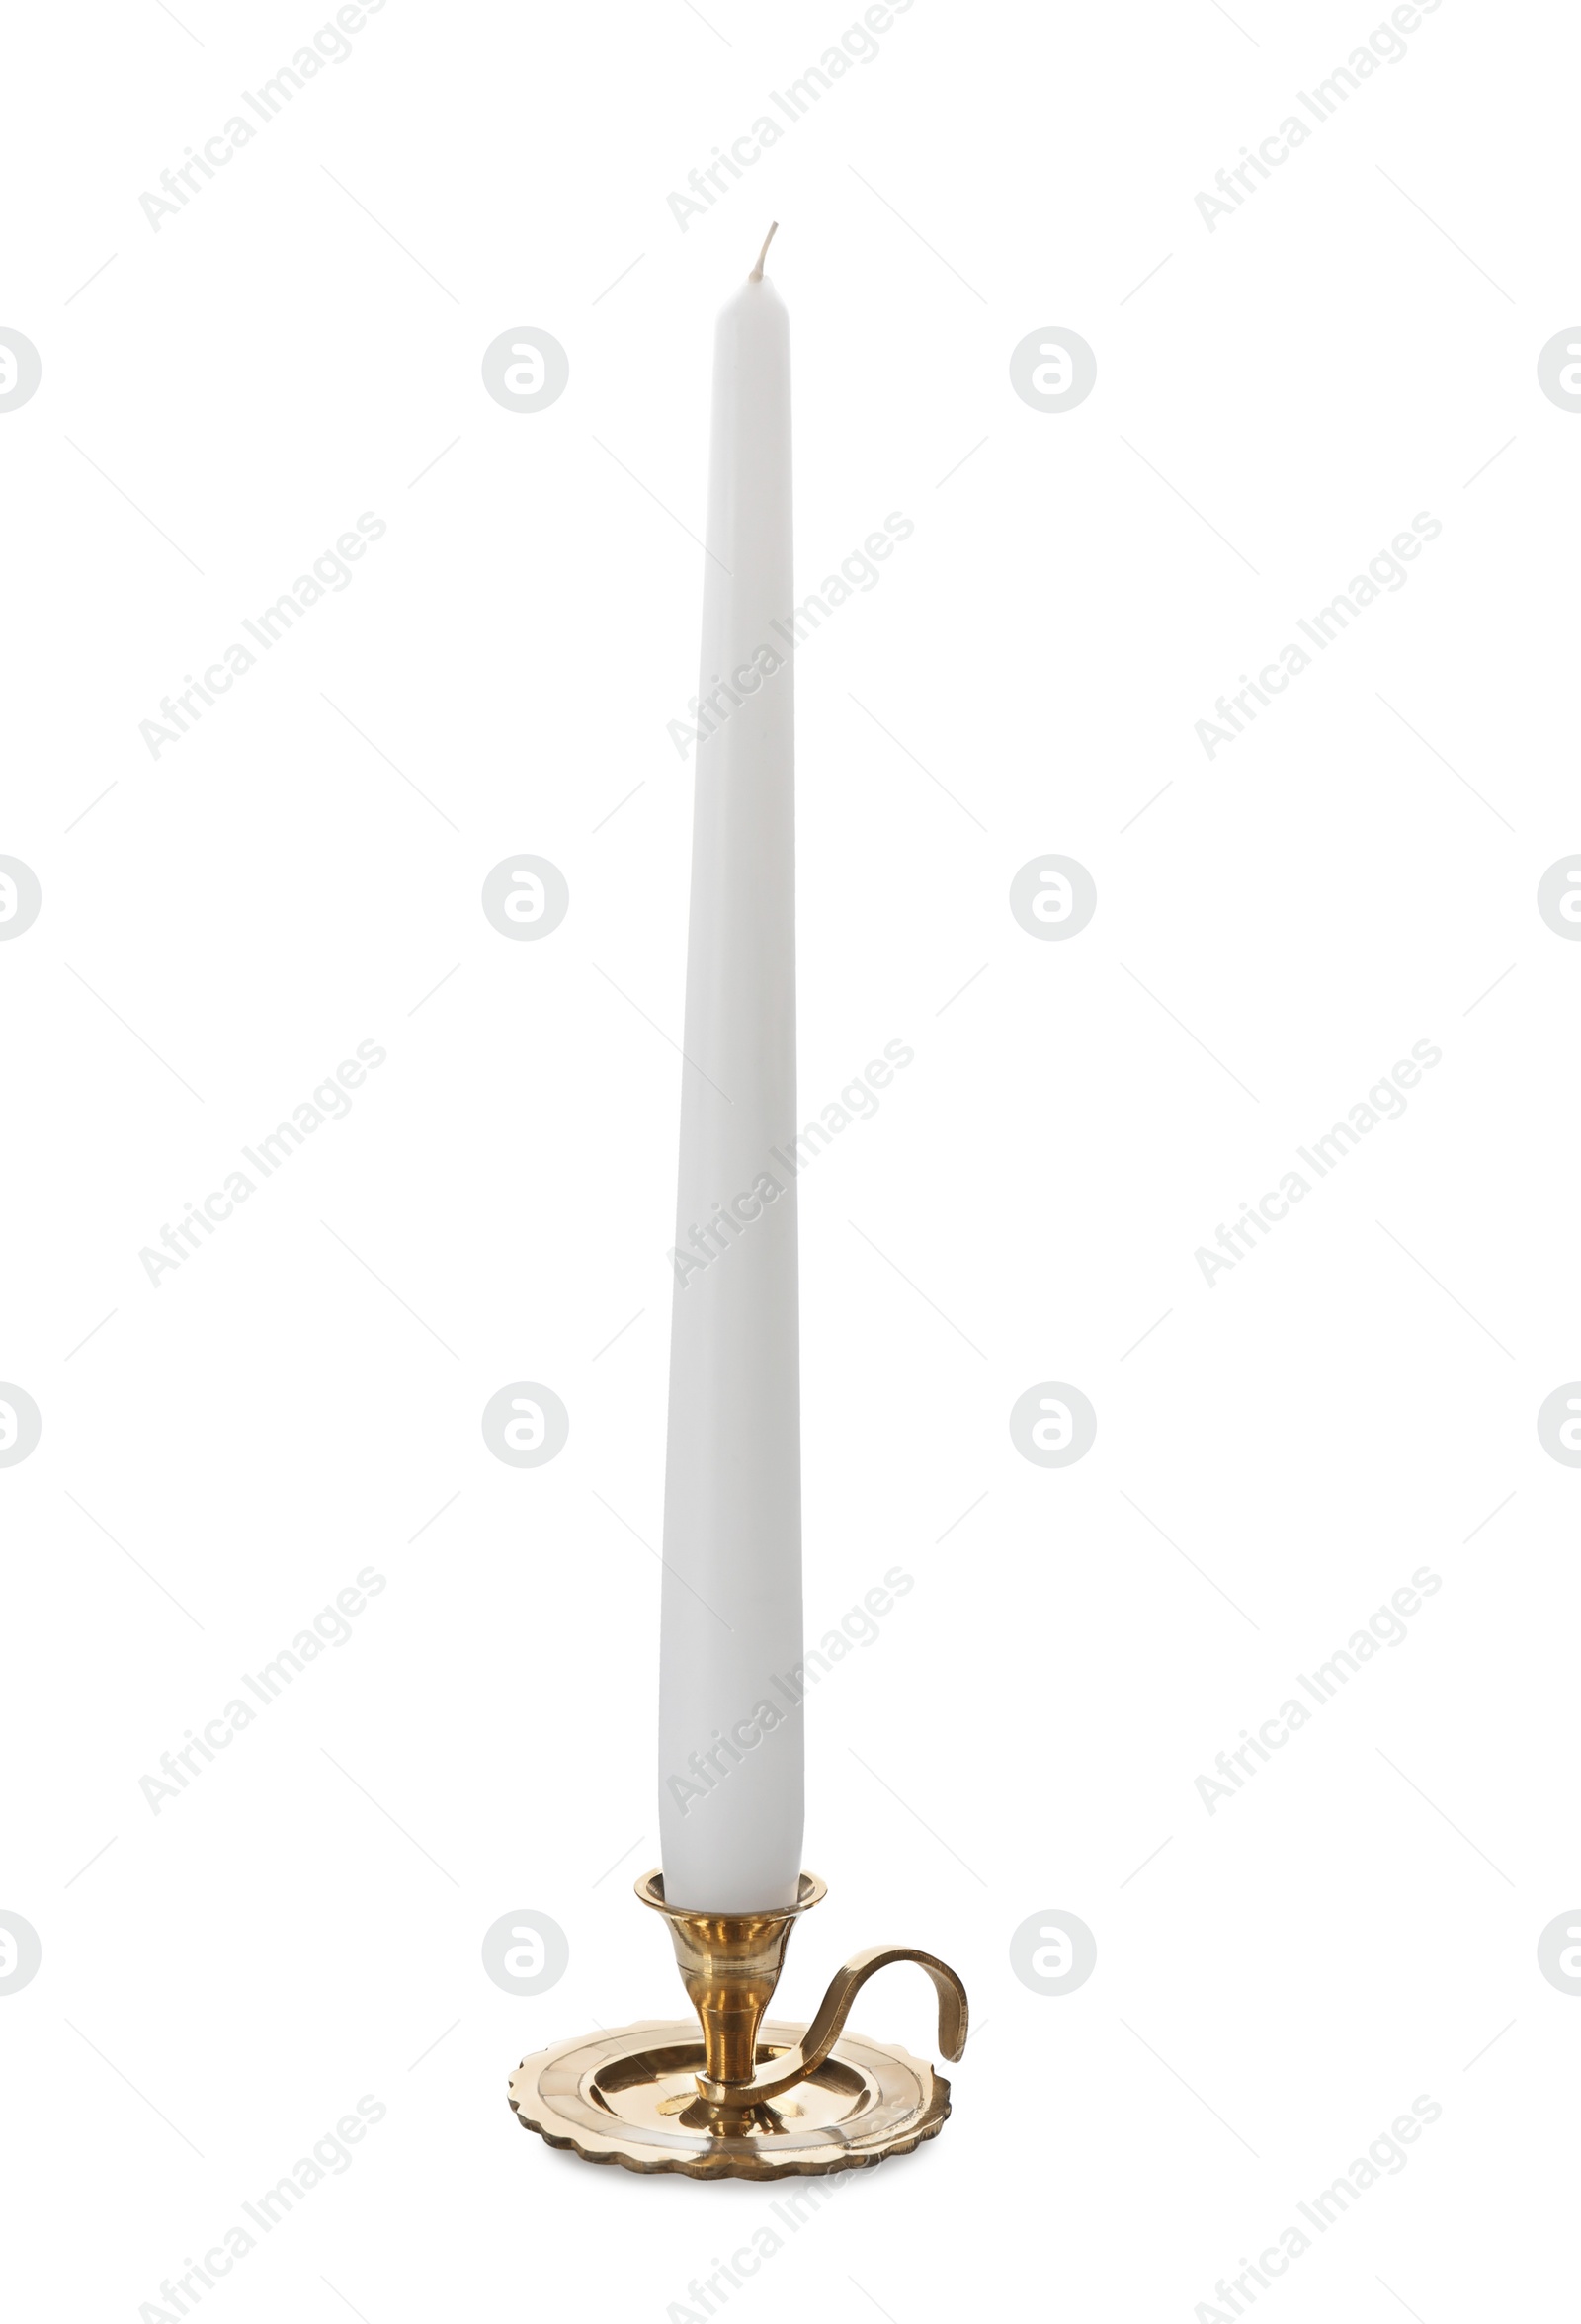 Photo of Elegant candlestick with candle isolated on white